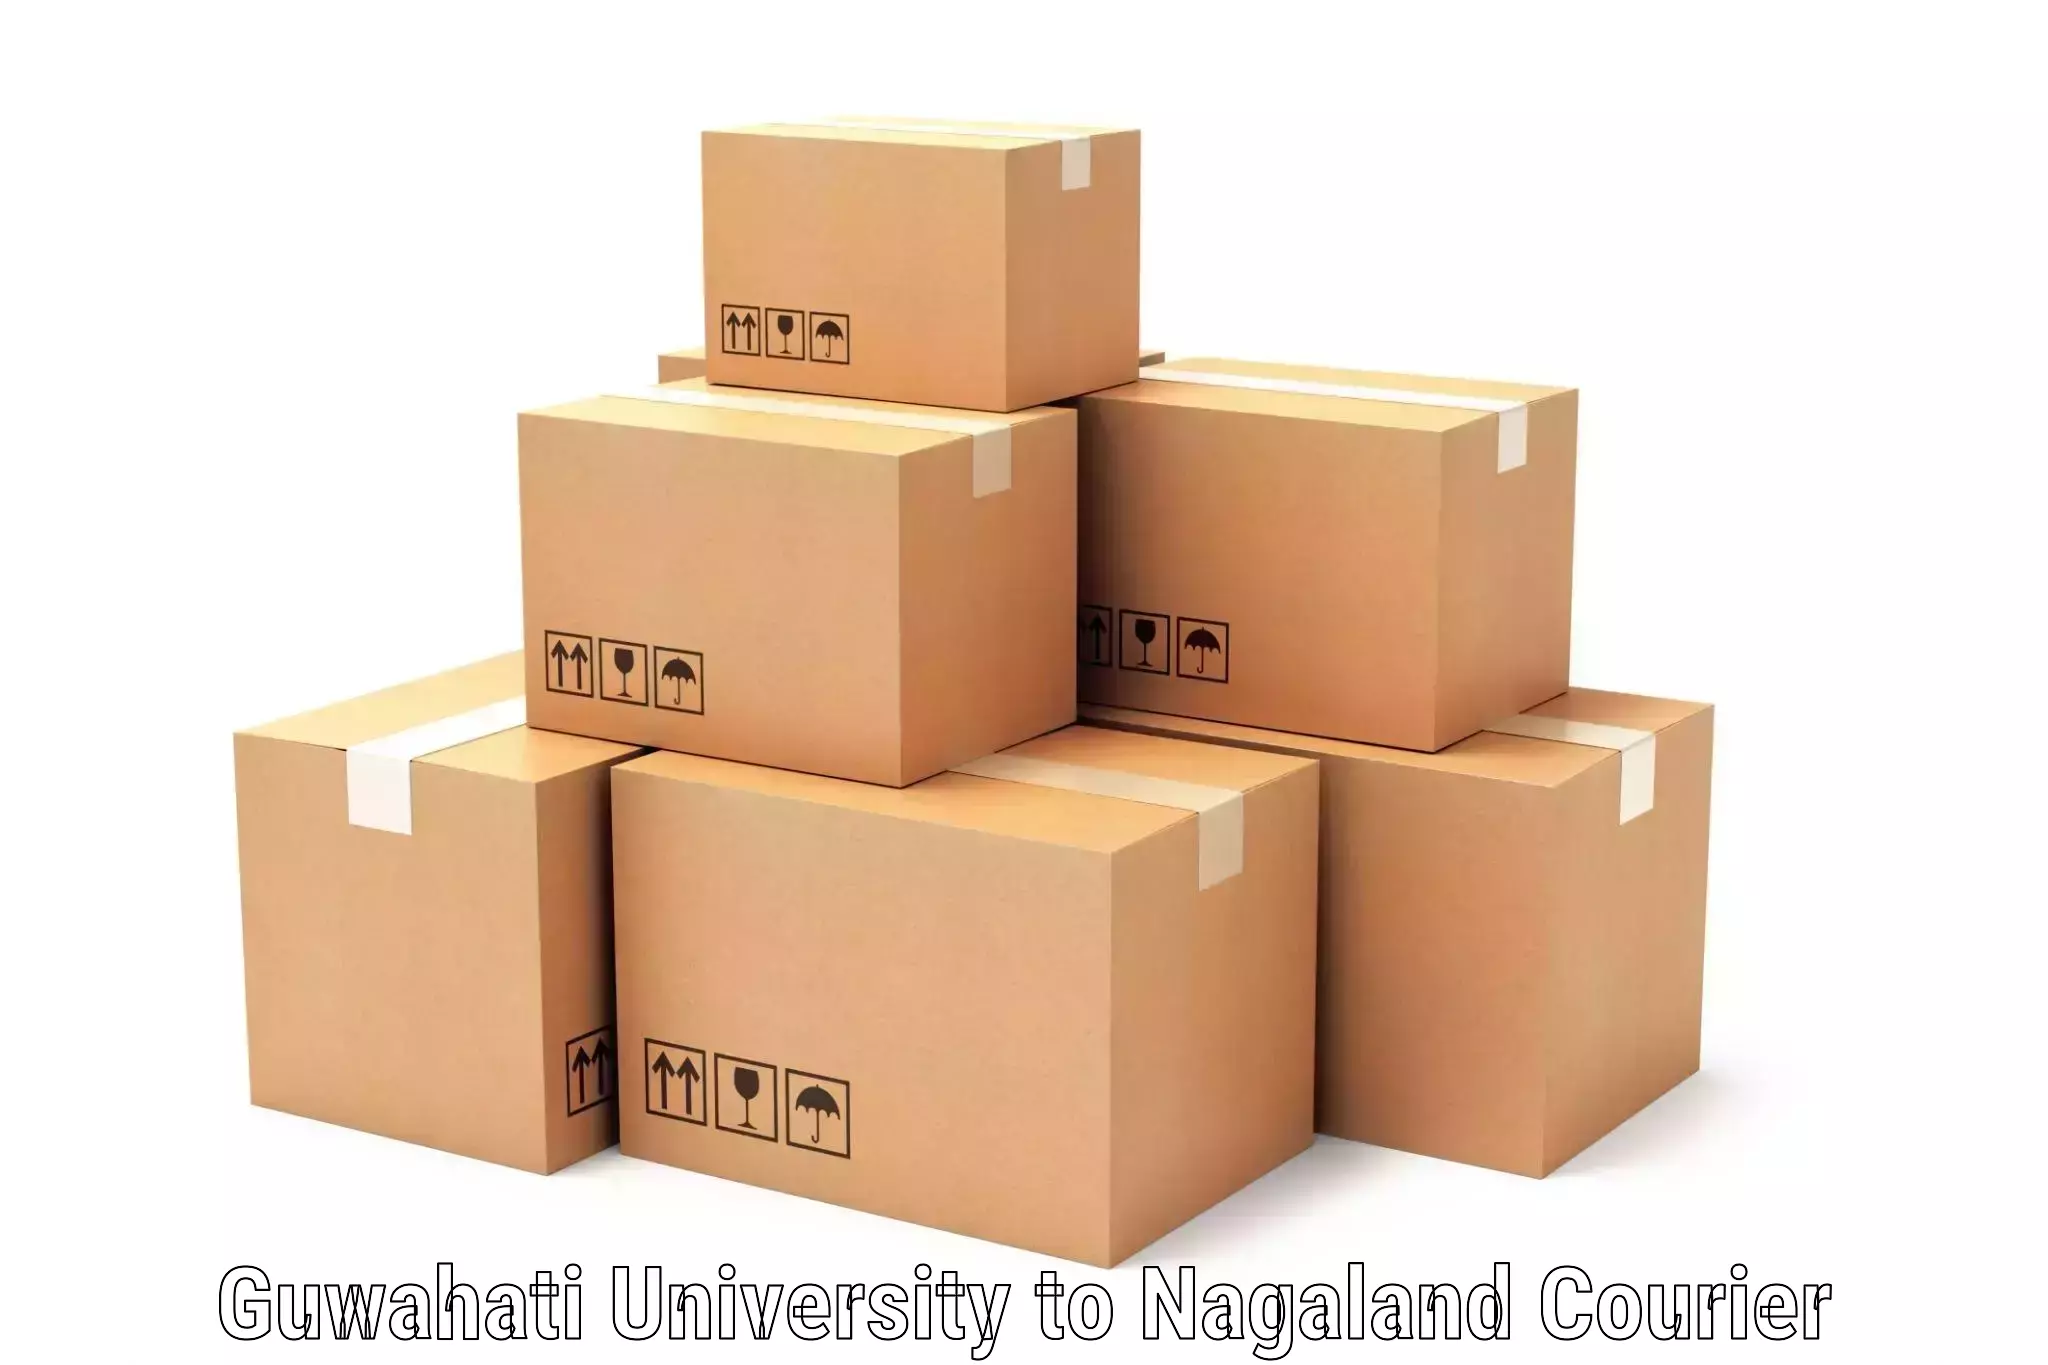 Reliable courier service Guwahati University to Longleng